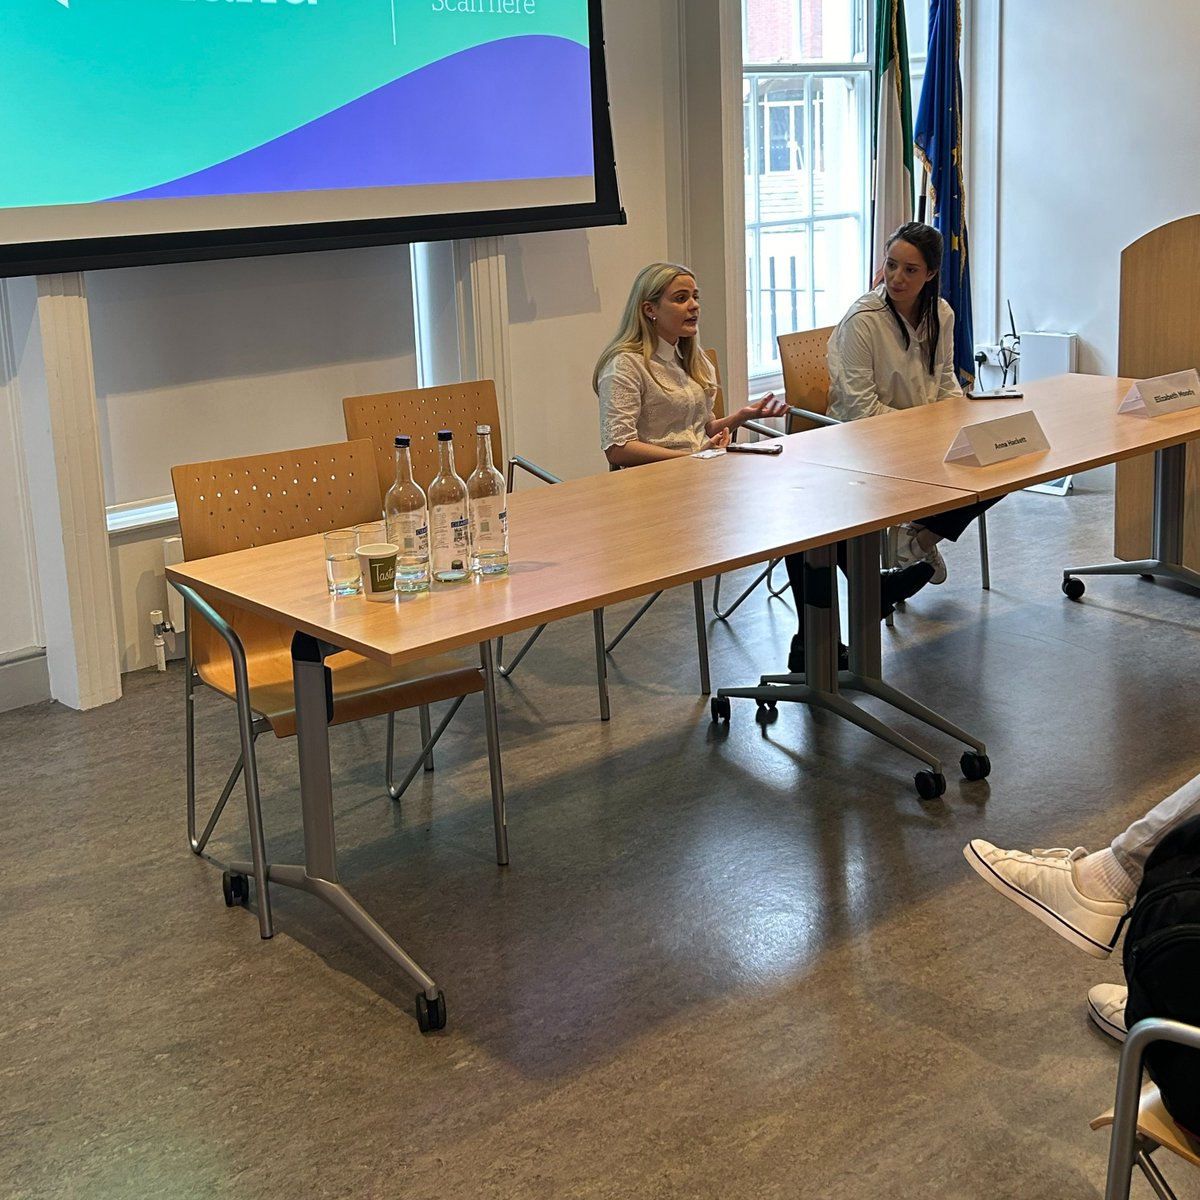 Great day here at Europe House for The European Skills Academy, in collaboration with @emireland and @youngeuromove 🇪🇺 Our panel discussed a wide range of topics- from career opportunities in the EU and traineeships to speaking on the upcoming European Elections! #UseYourVote